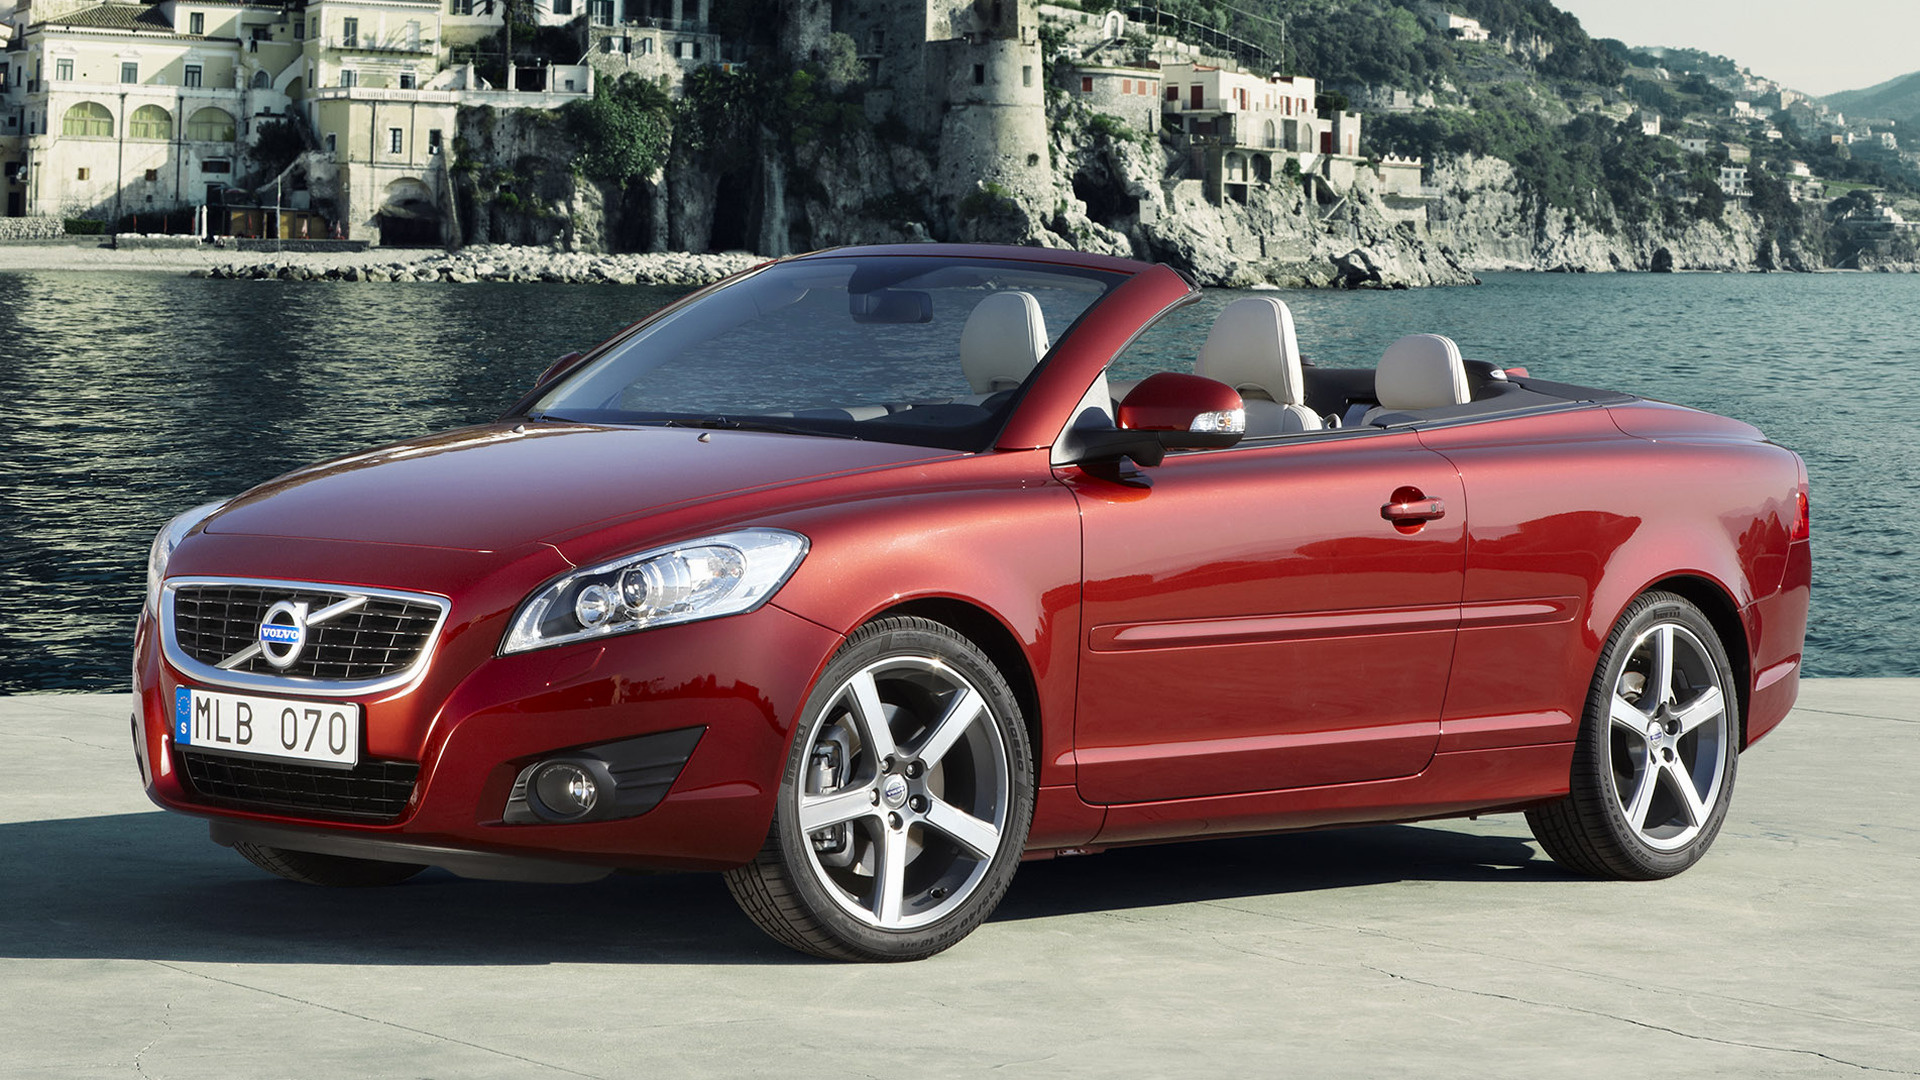 Compact Car Convertible Luxury Car Red Car Volvo C70 1920x1080